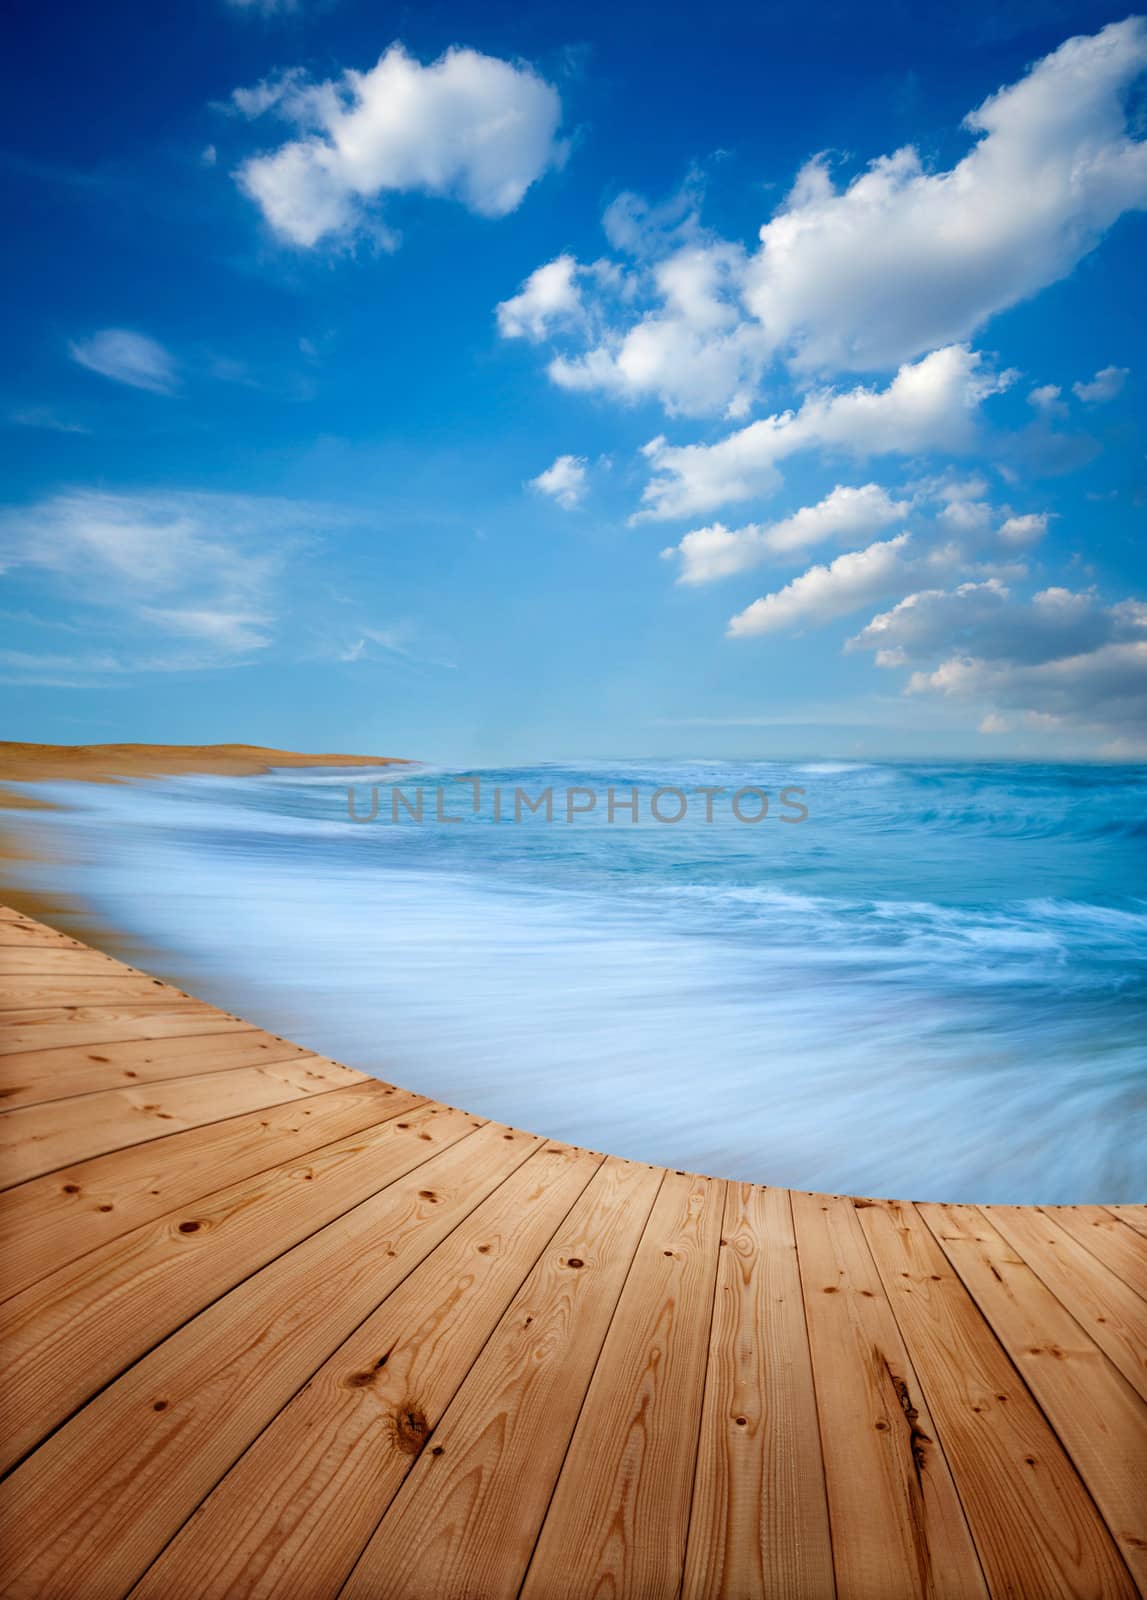 Wooden floor and blue beach in Terengganu, West Malaysia